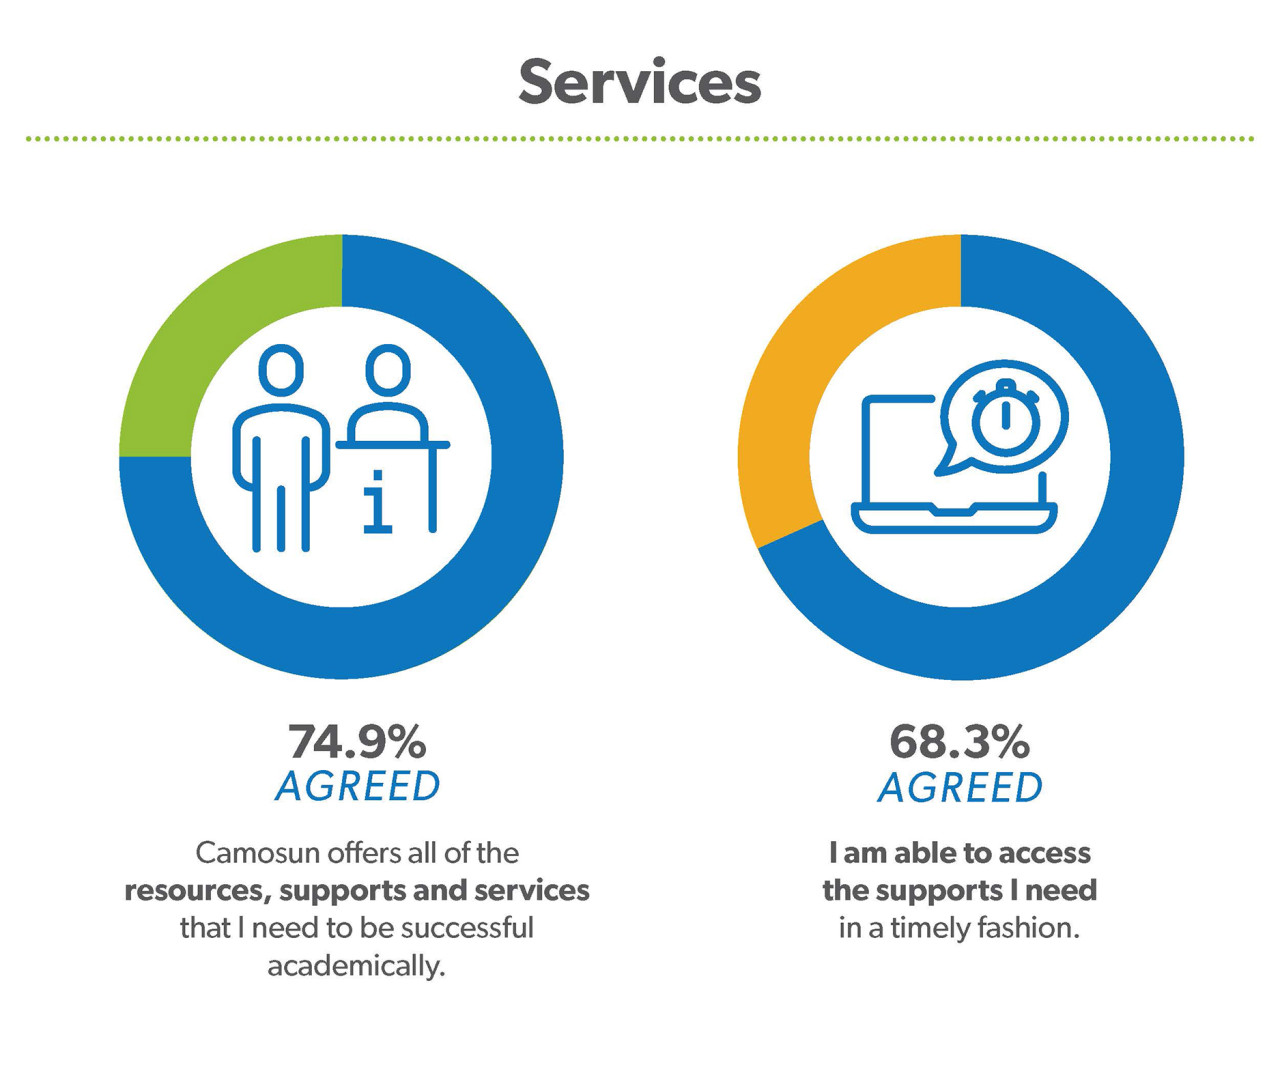 74.9% of students agreed that Camosun offers all of the supports and services they need to be successful. 63.3% agreed that they we're able to access the supports they needed in a timely fashion. 